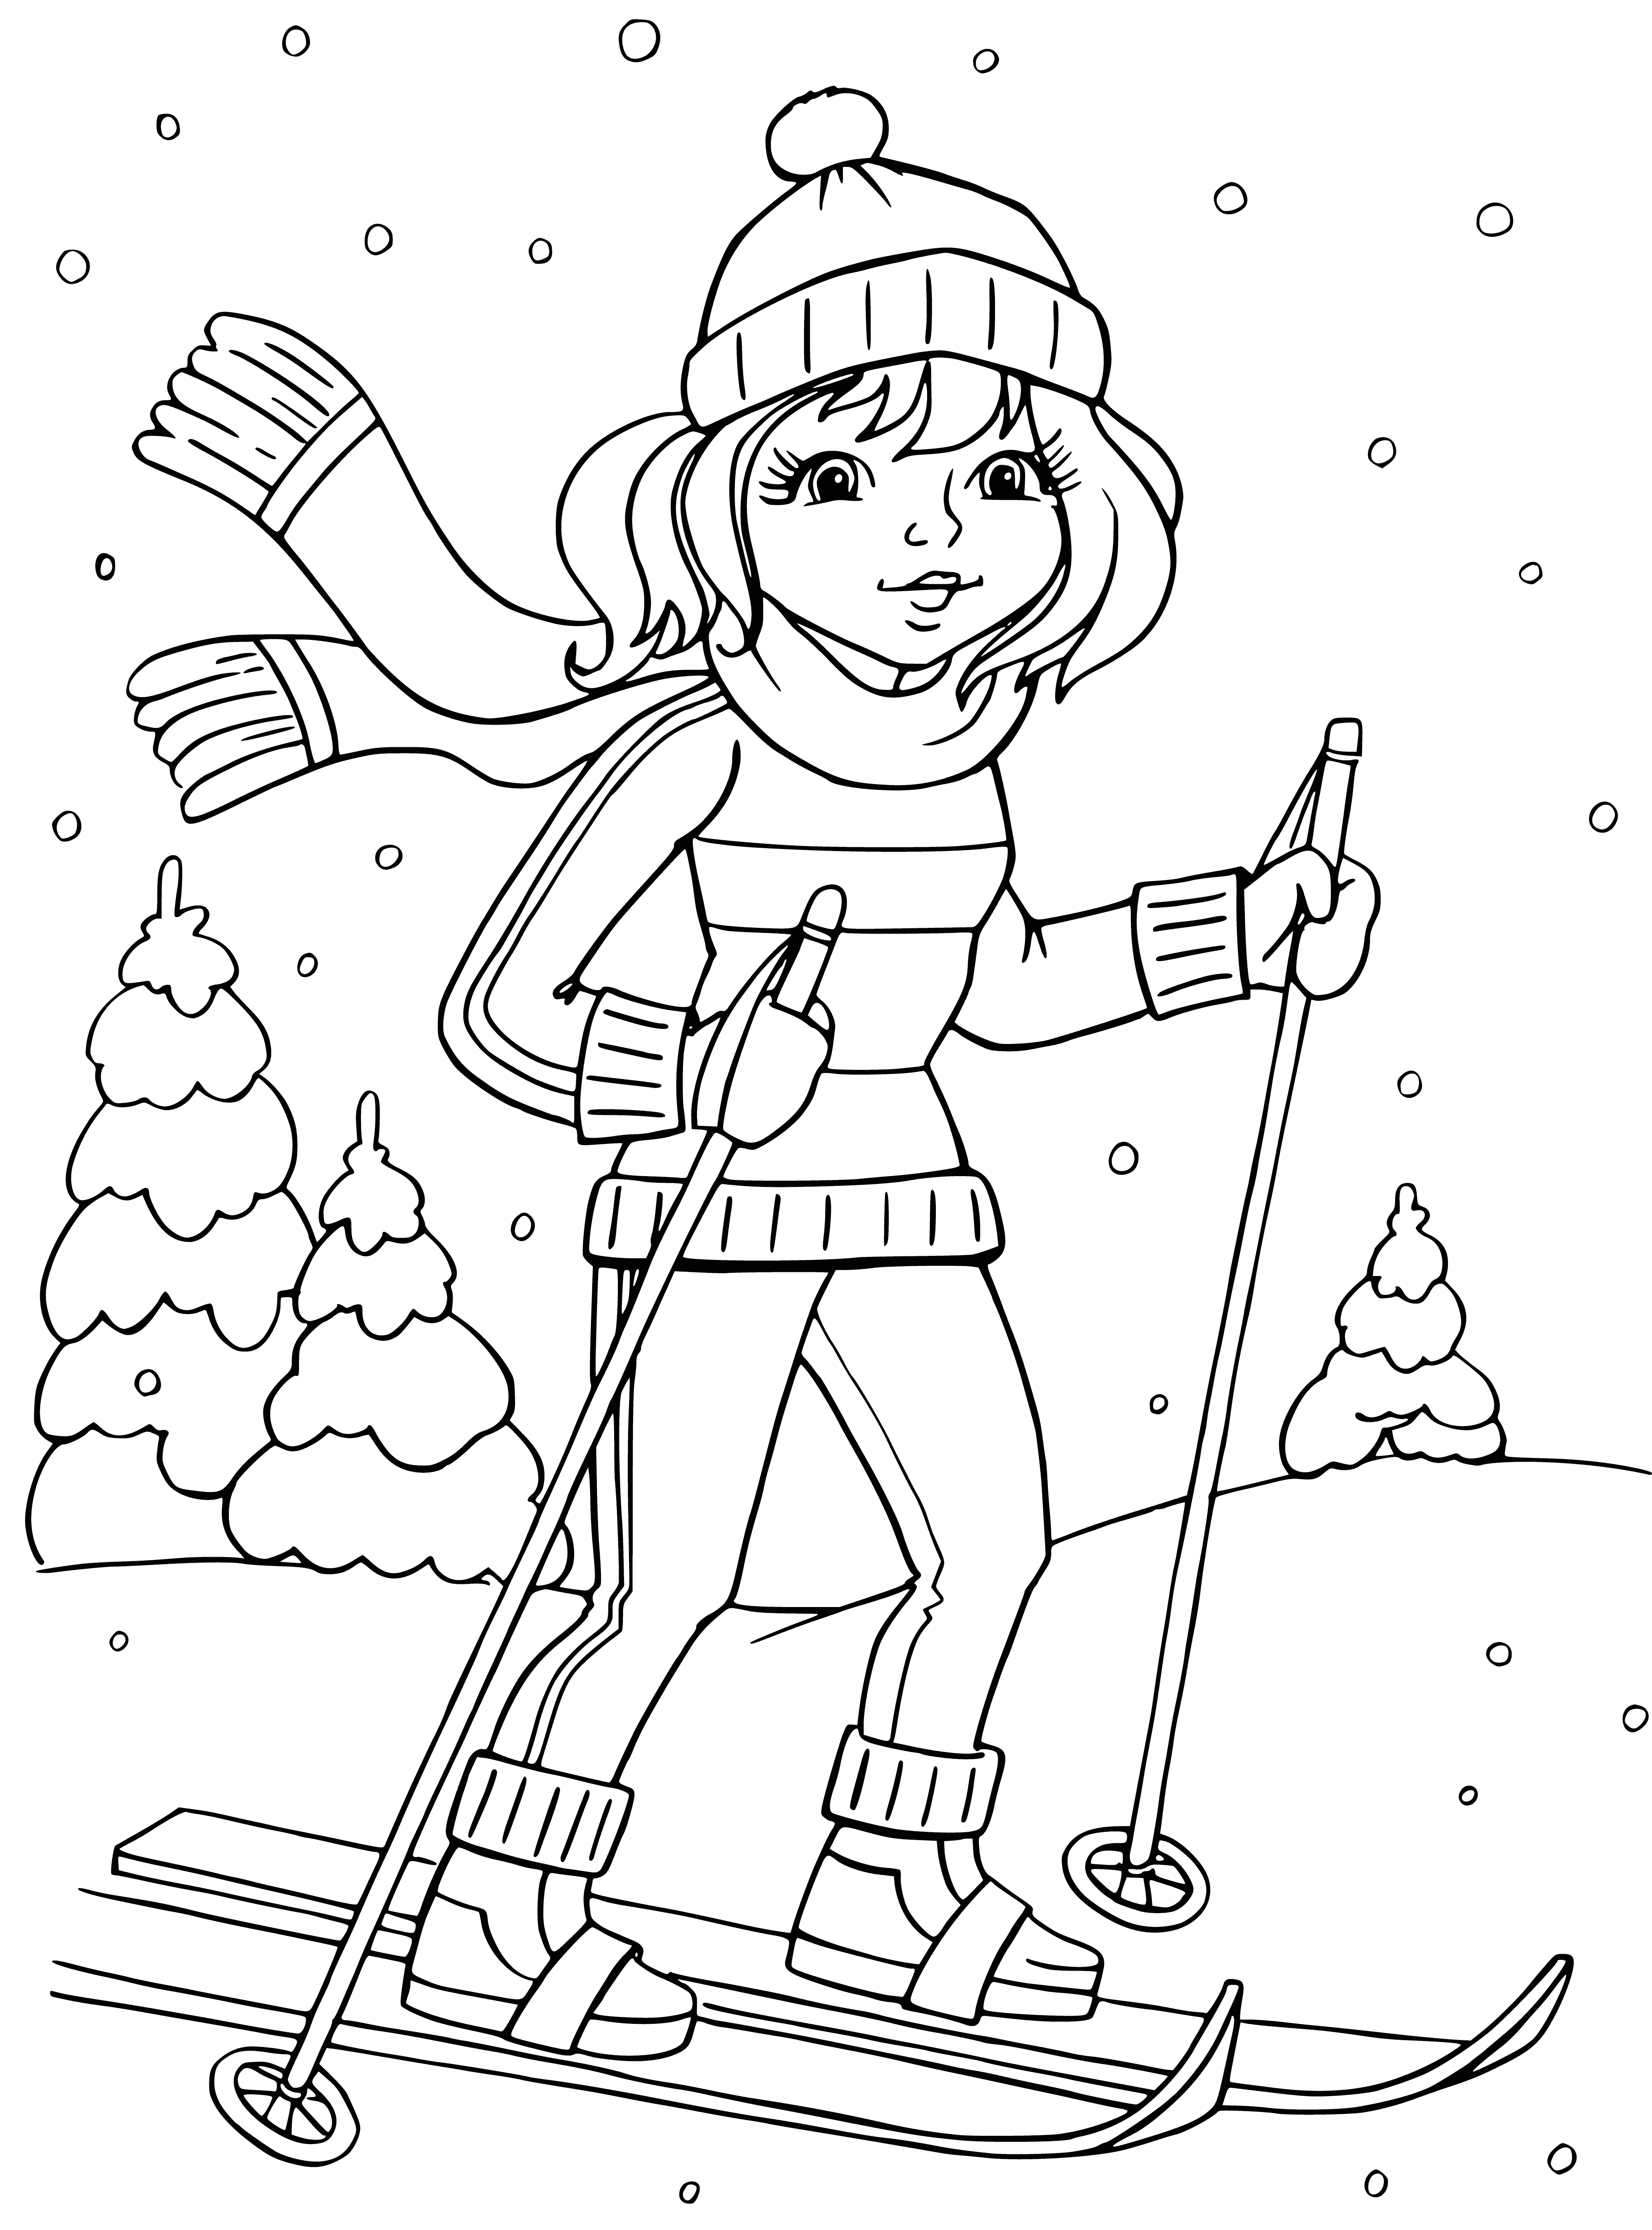 coloring page: Person skiing down snow-covered hill wearing blue jacket & pants, red scarf, carrying two long poles.